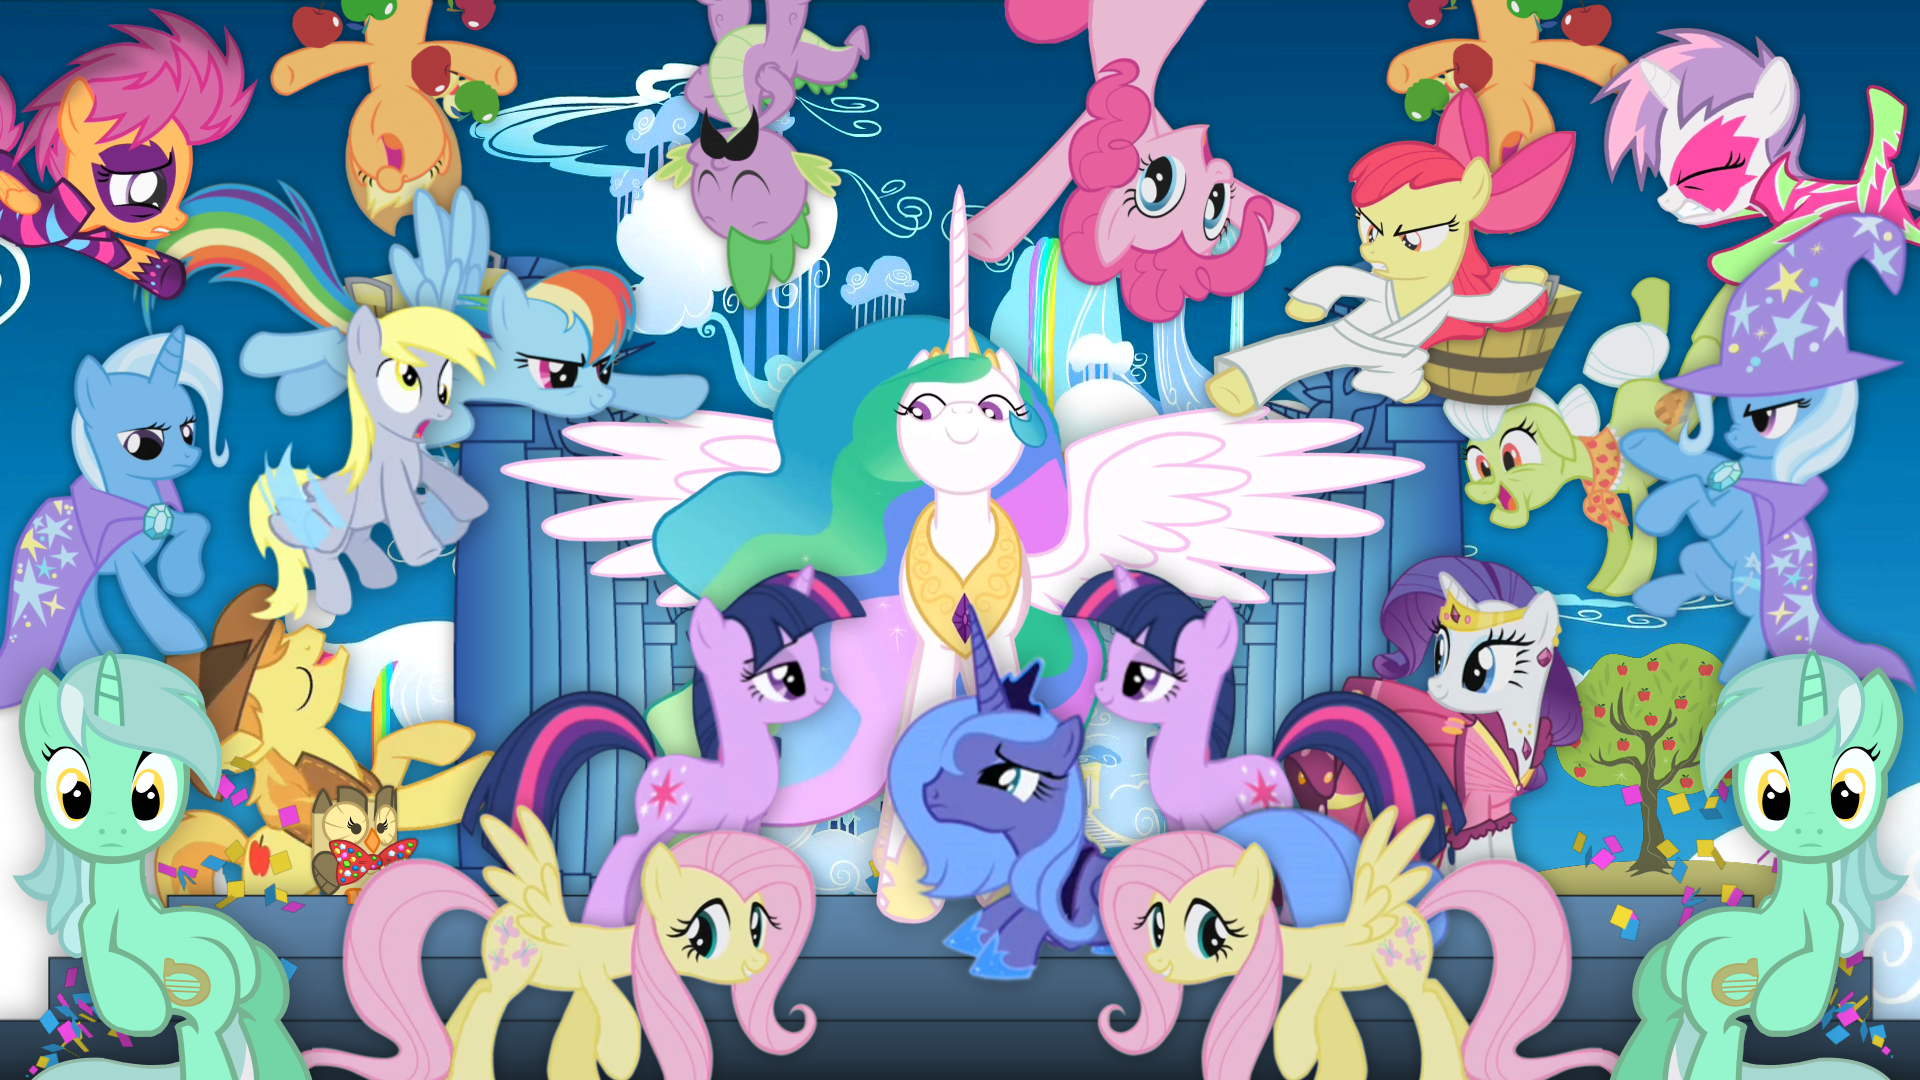 A screenshot of several ponies (some multiple times) gathered around Princess Celestia, in a visual homage to Kanye West's "POWER" music video.